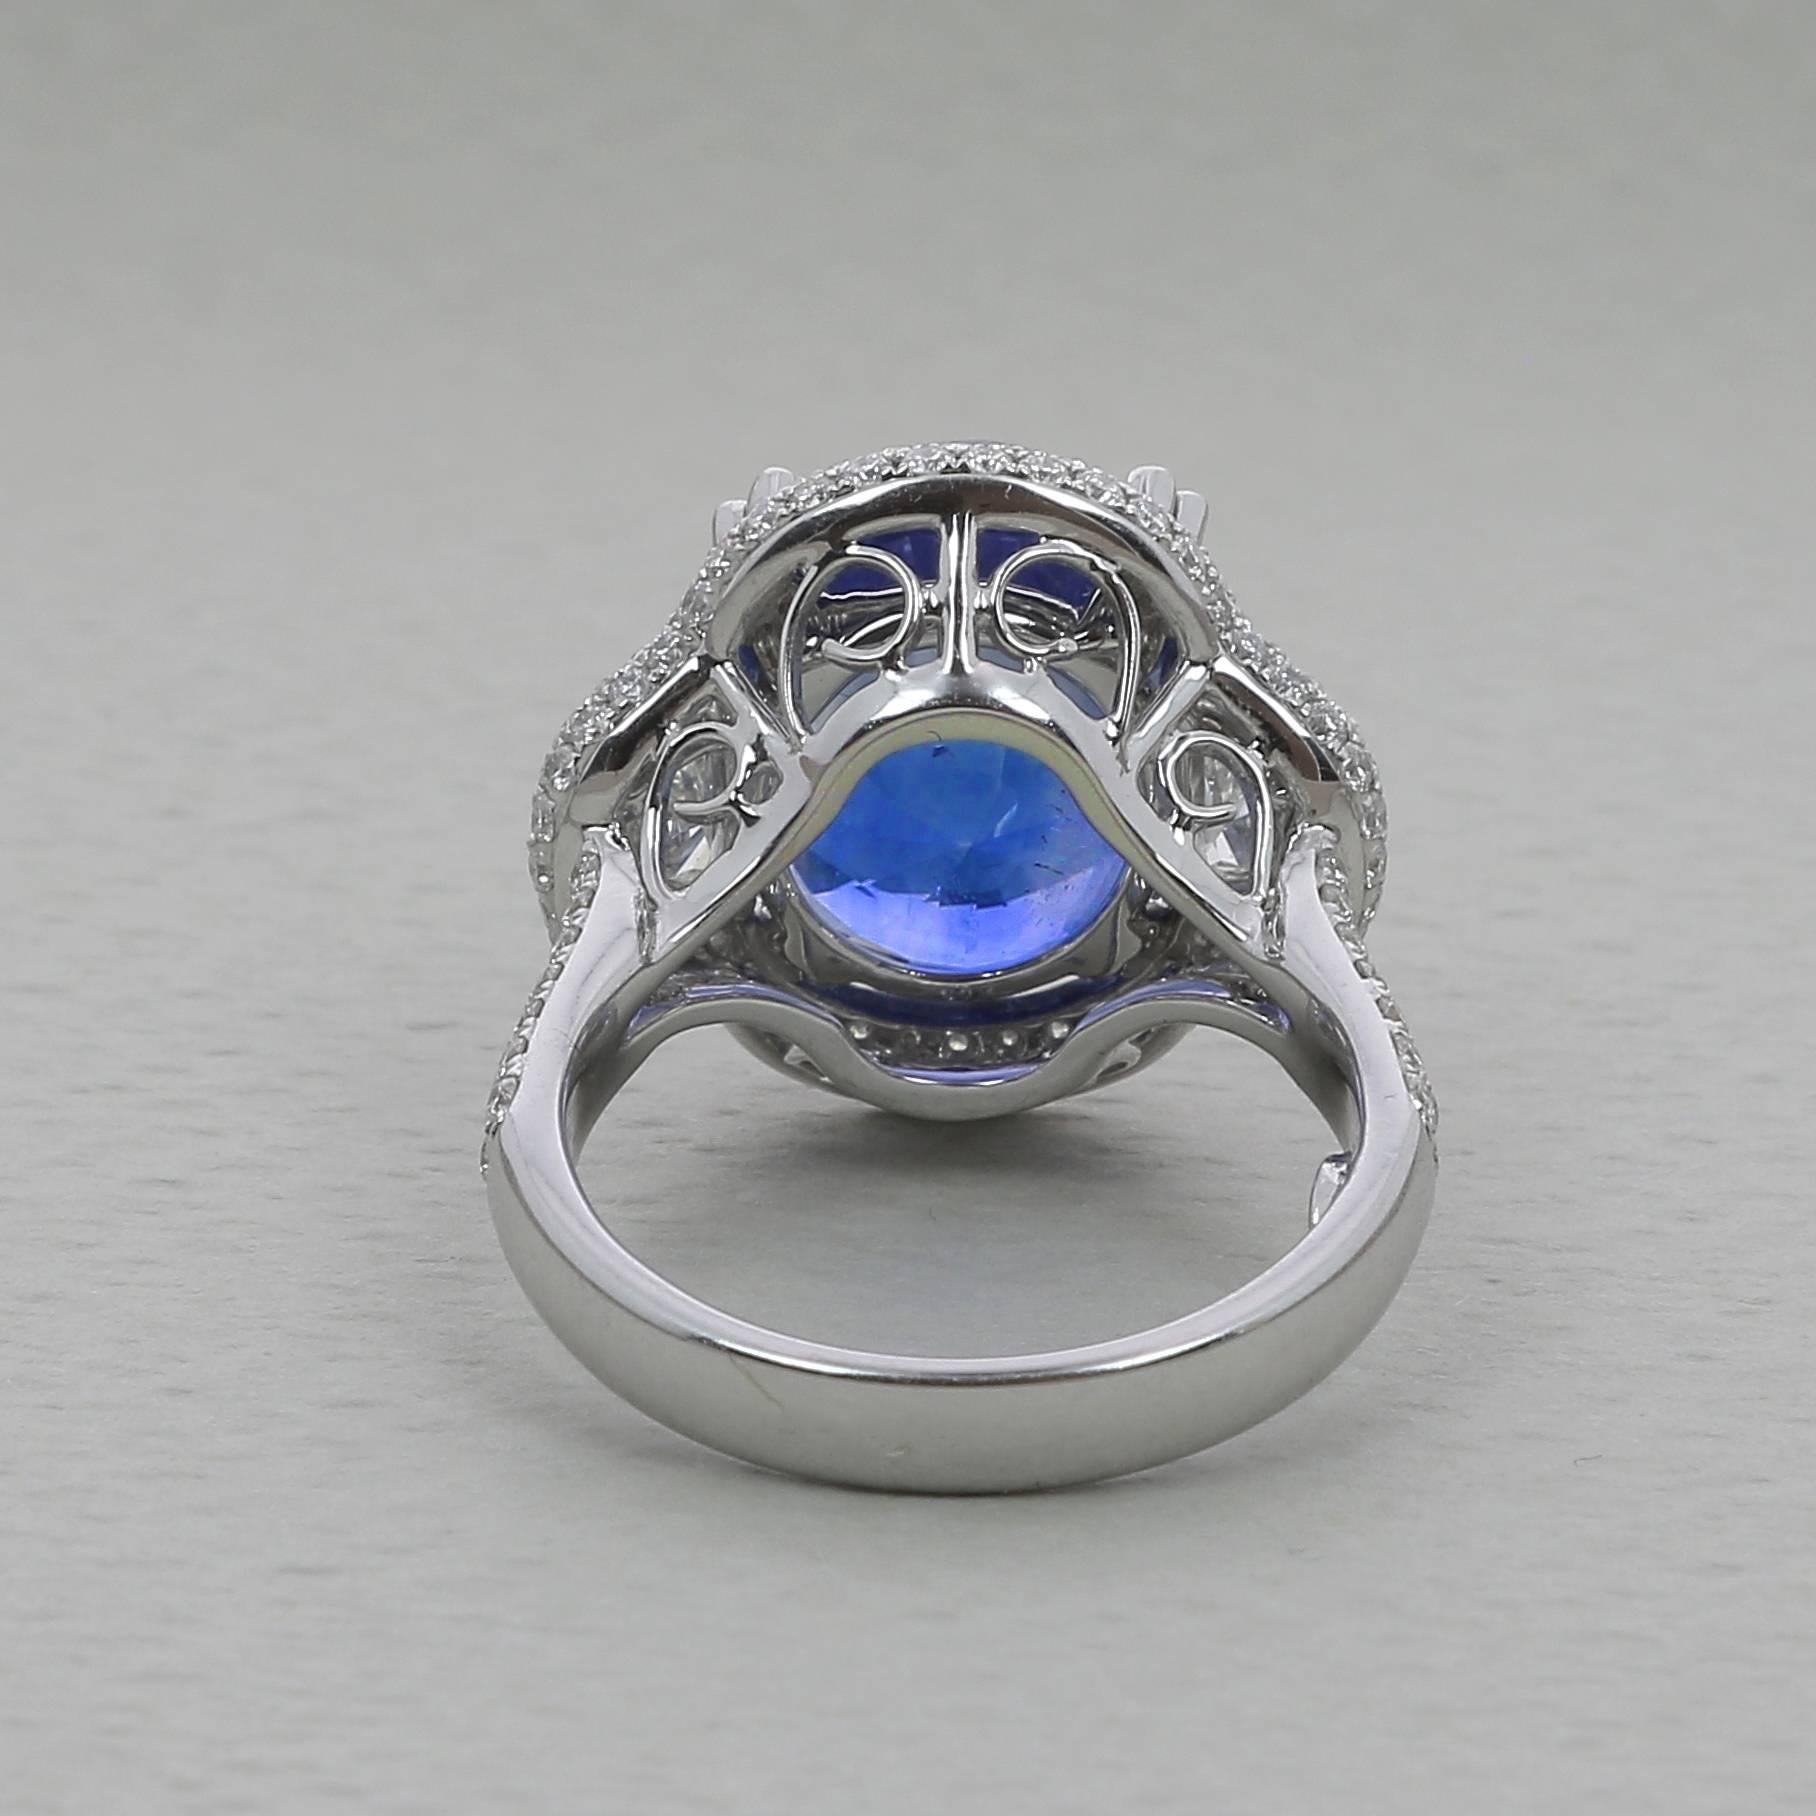 12.47 Carat Blue Sapphire Cocktail Ring Round/Half Moon Diamonds 18K White Gold In New Condition For Sale In Istanbul, TR